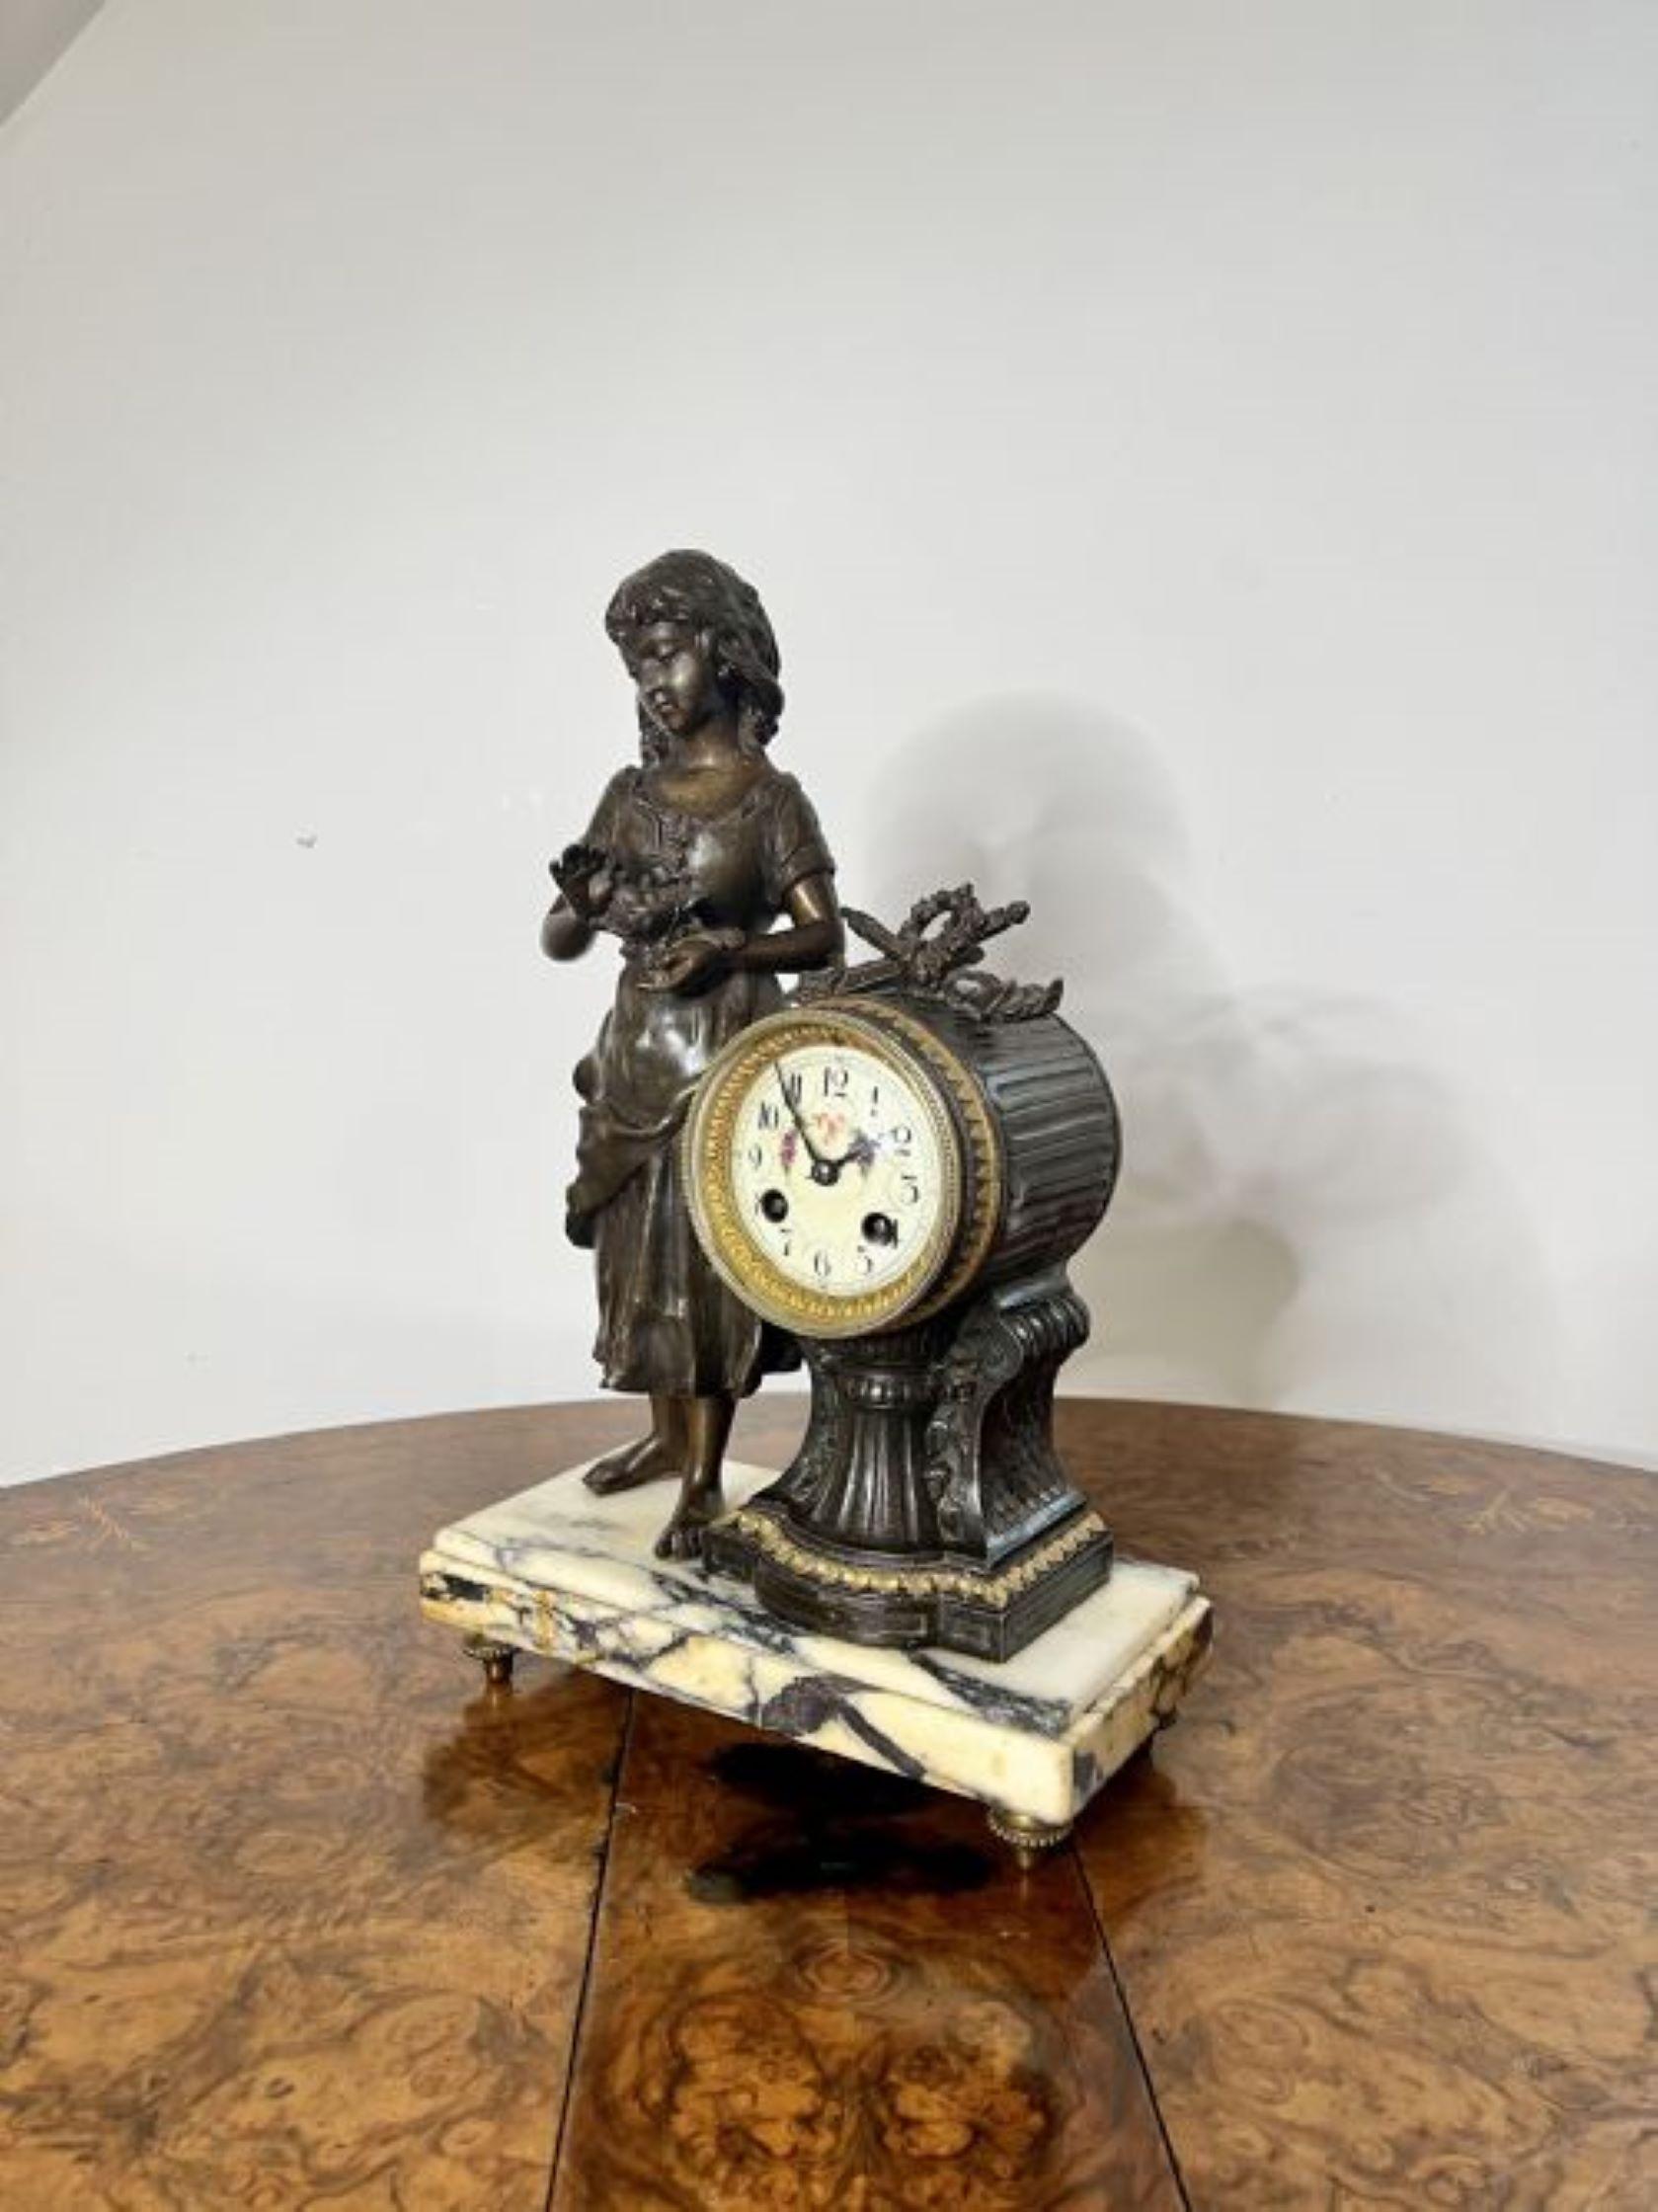 Outstanding quality antique Victorian clock garniture, with spelter figure decoration having a figure of a girl holding a birds nest, and two decorated side urns, having a circular porcelain floral dial with Arabic numerals, the original hands and